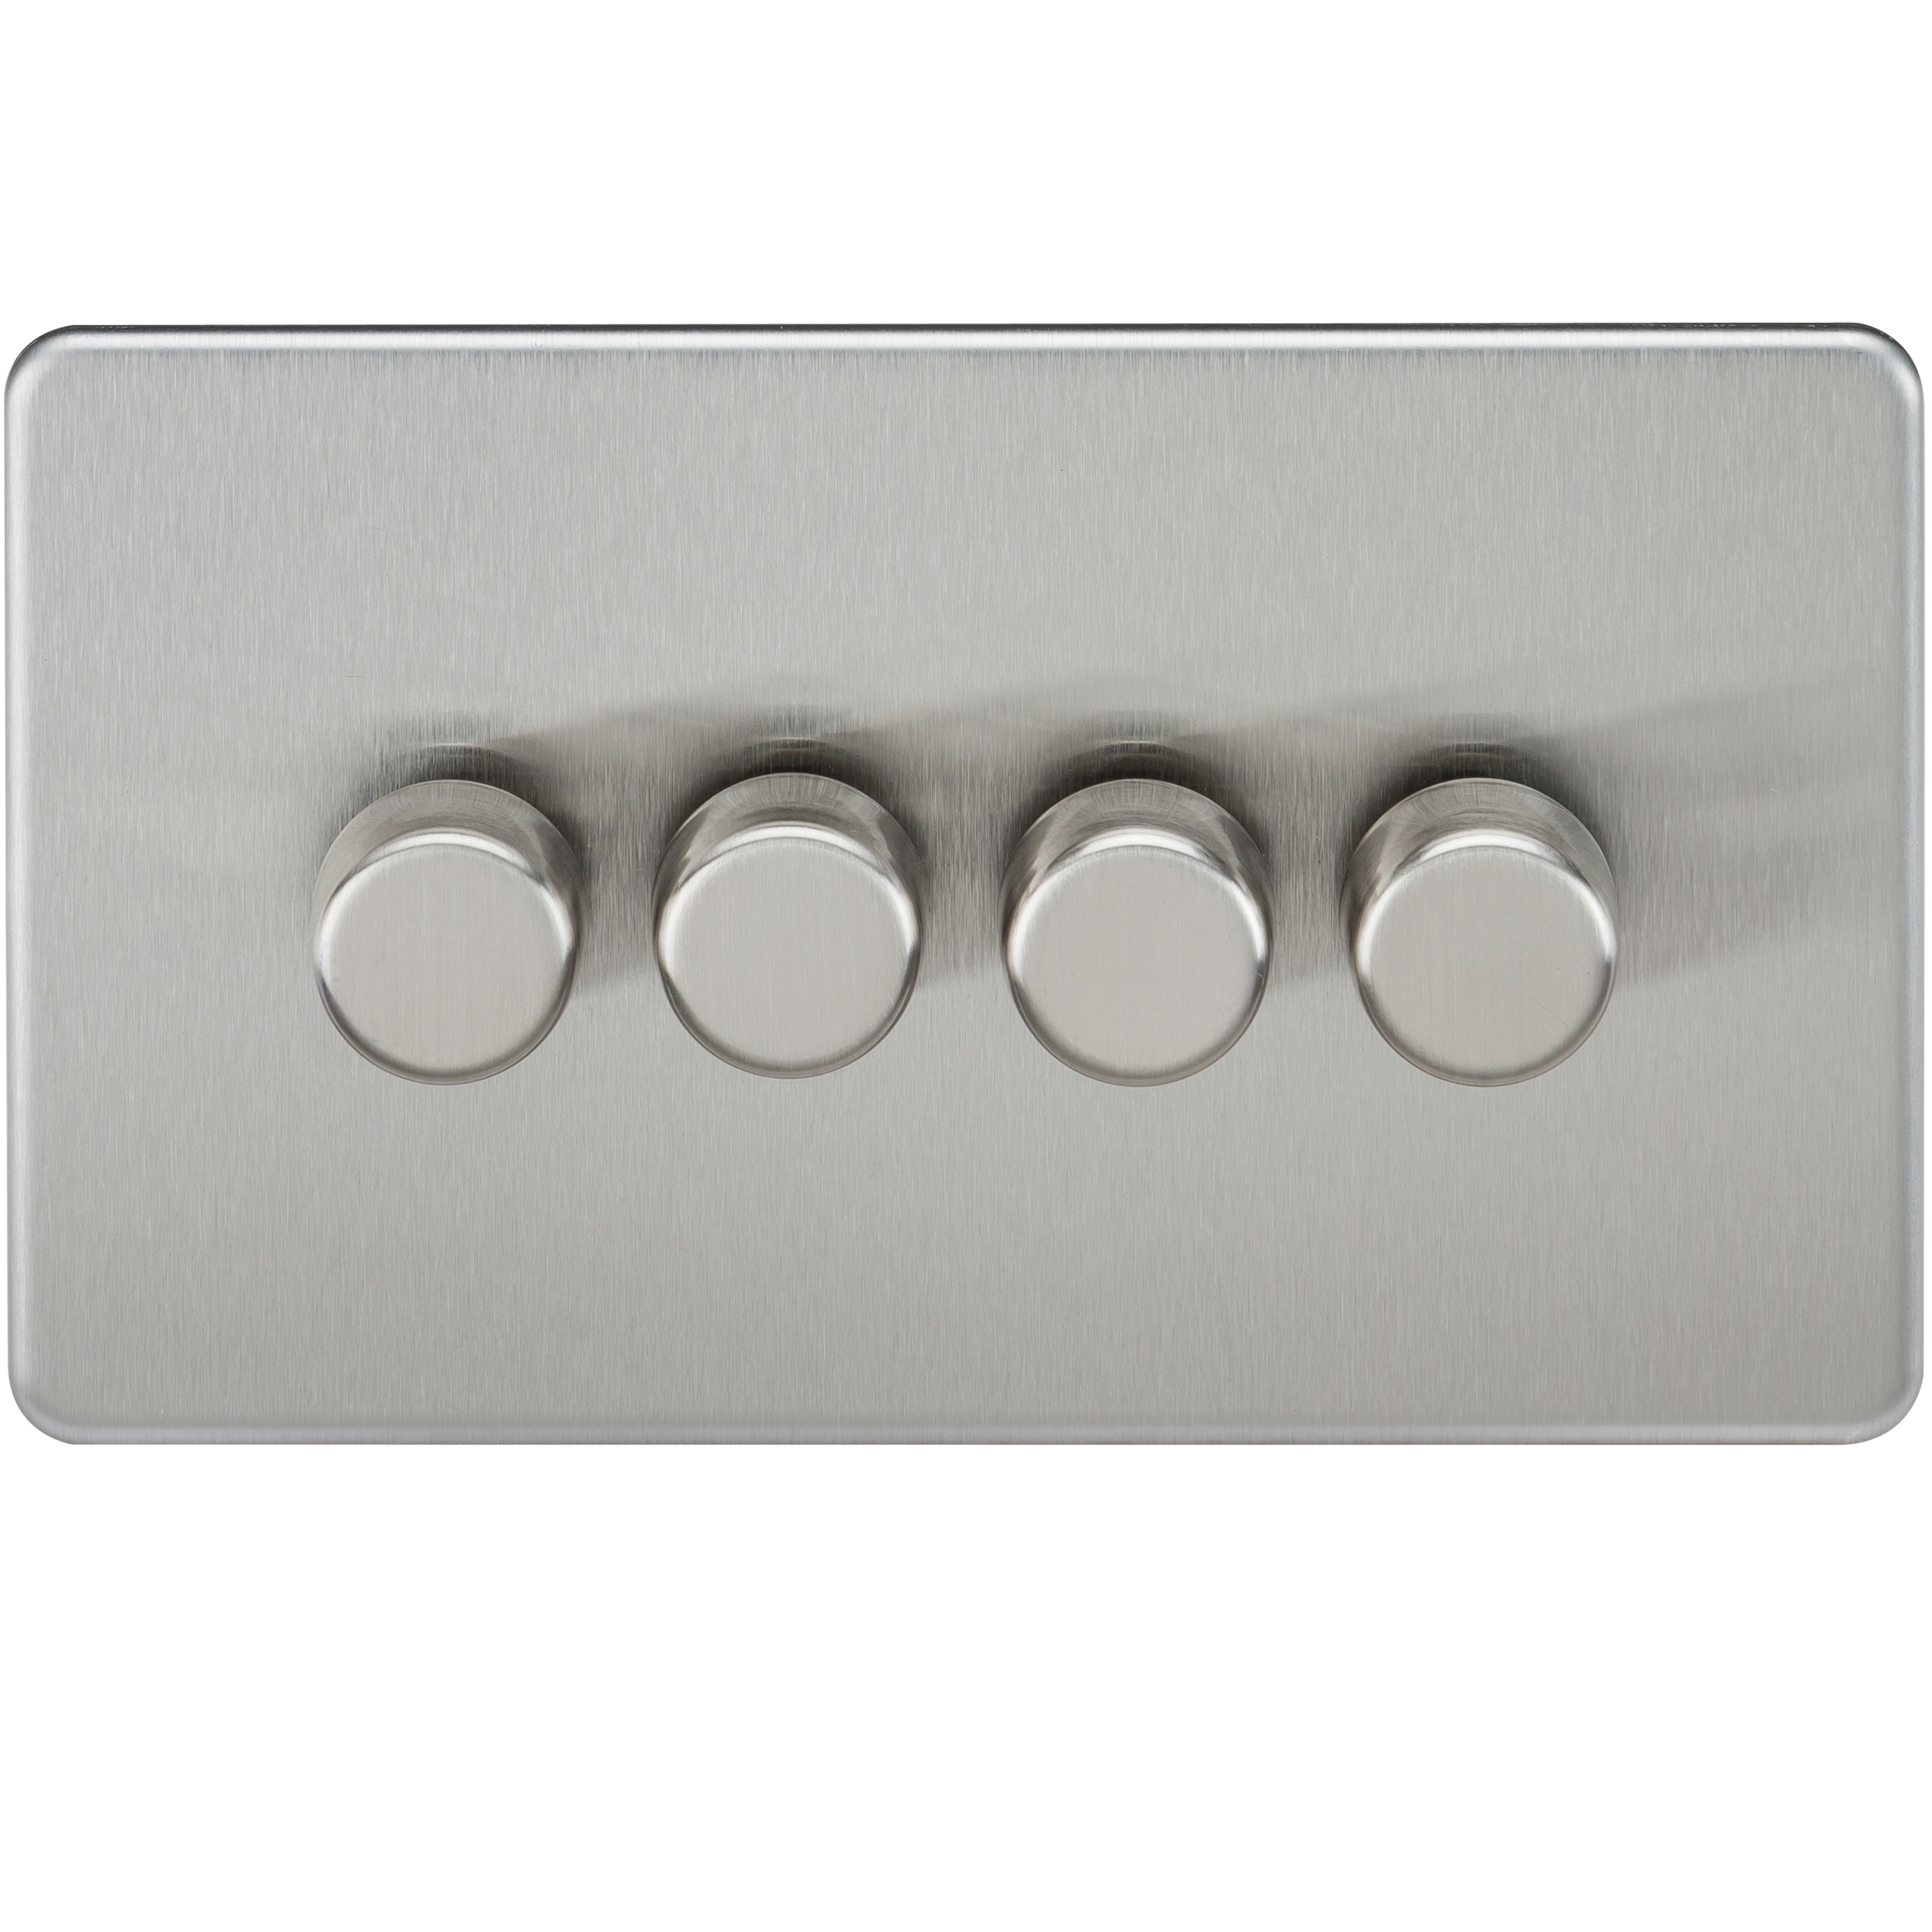 Screwless 4G 2-Way 40-400W Dimmer Switch - Brushed Chrome - SF2174BC 